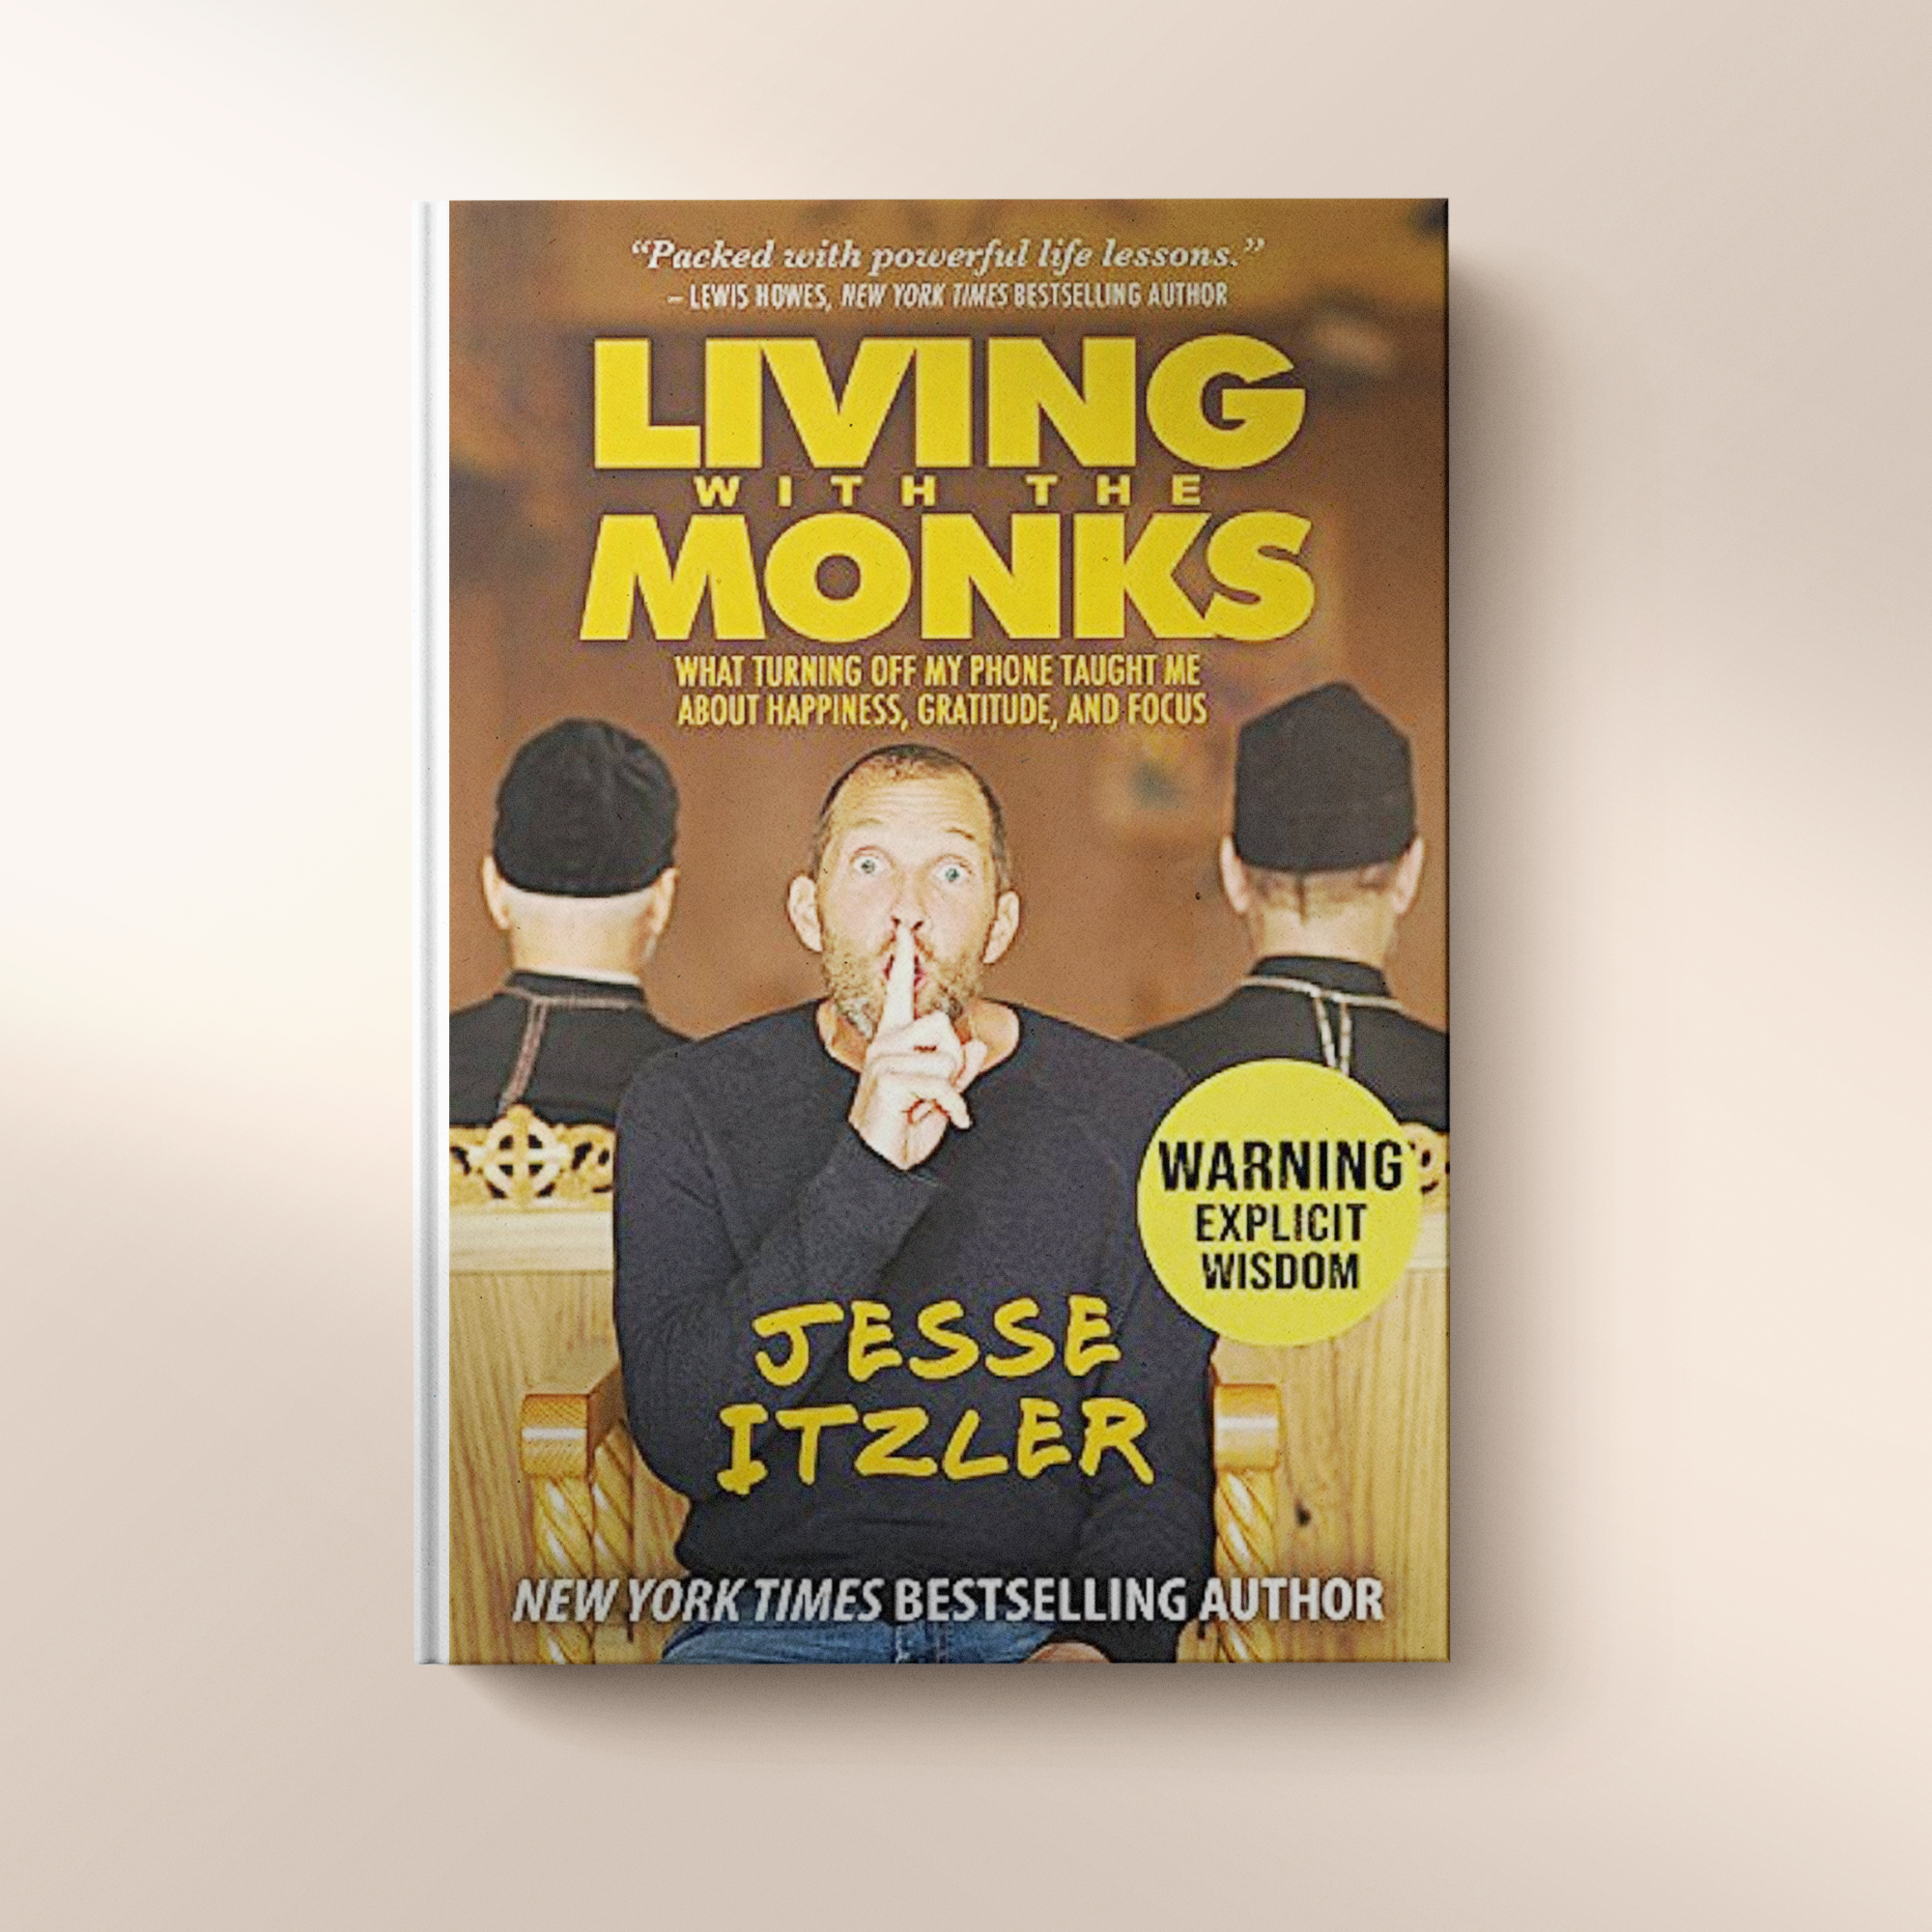 Living with the Monks, by Jesse Itzler